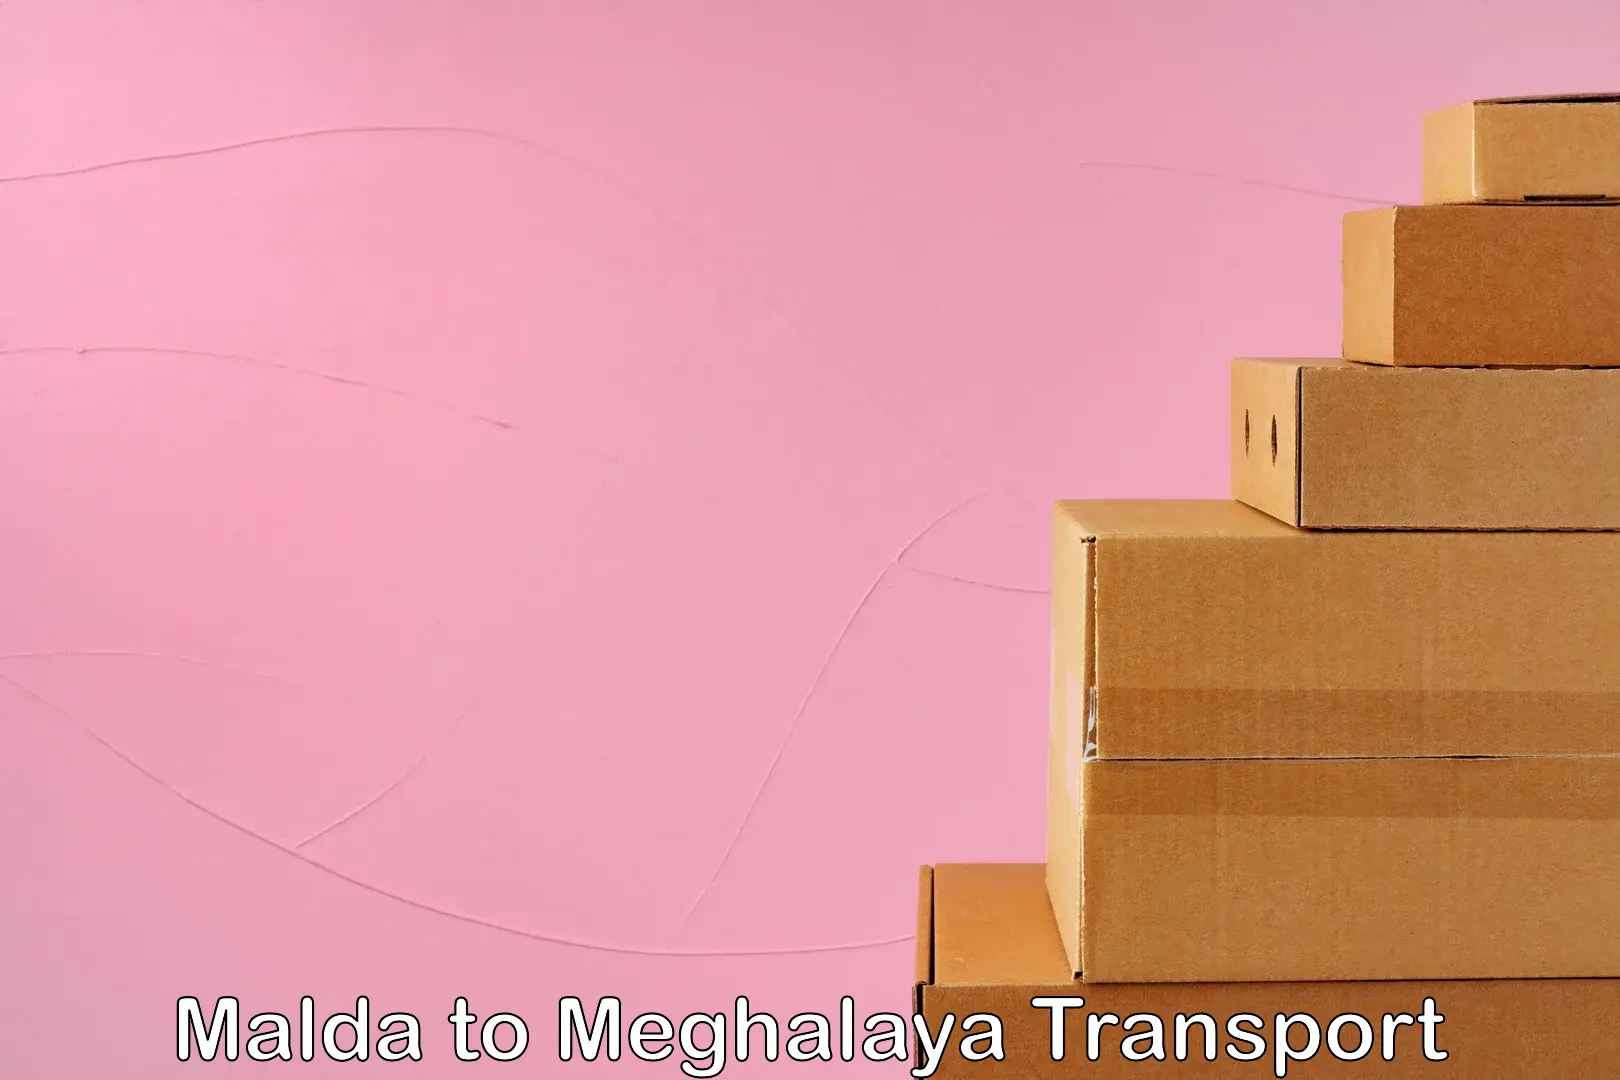 Air freight transport services in Malda to Dkhiah West